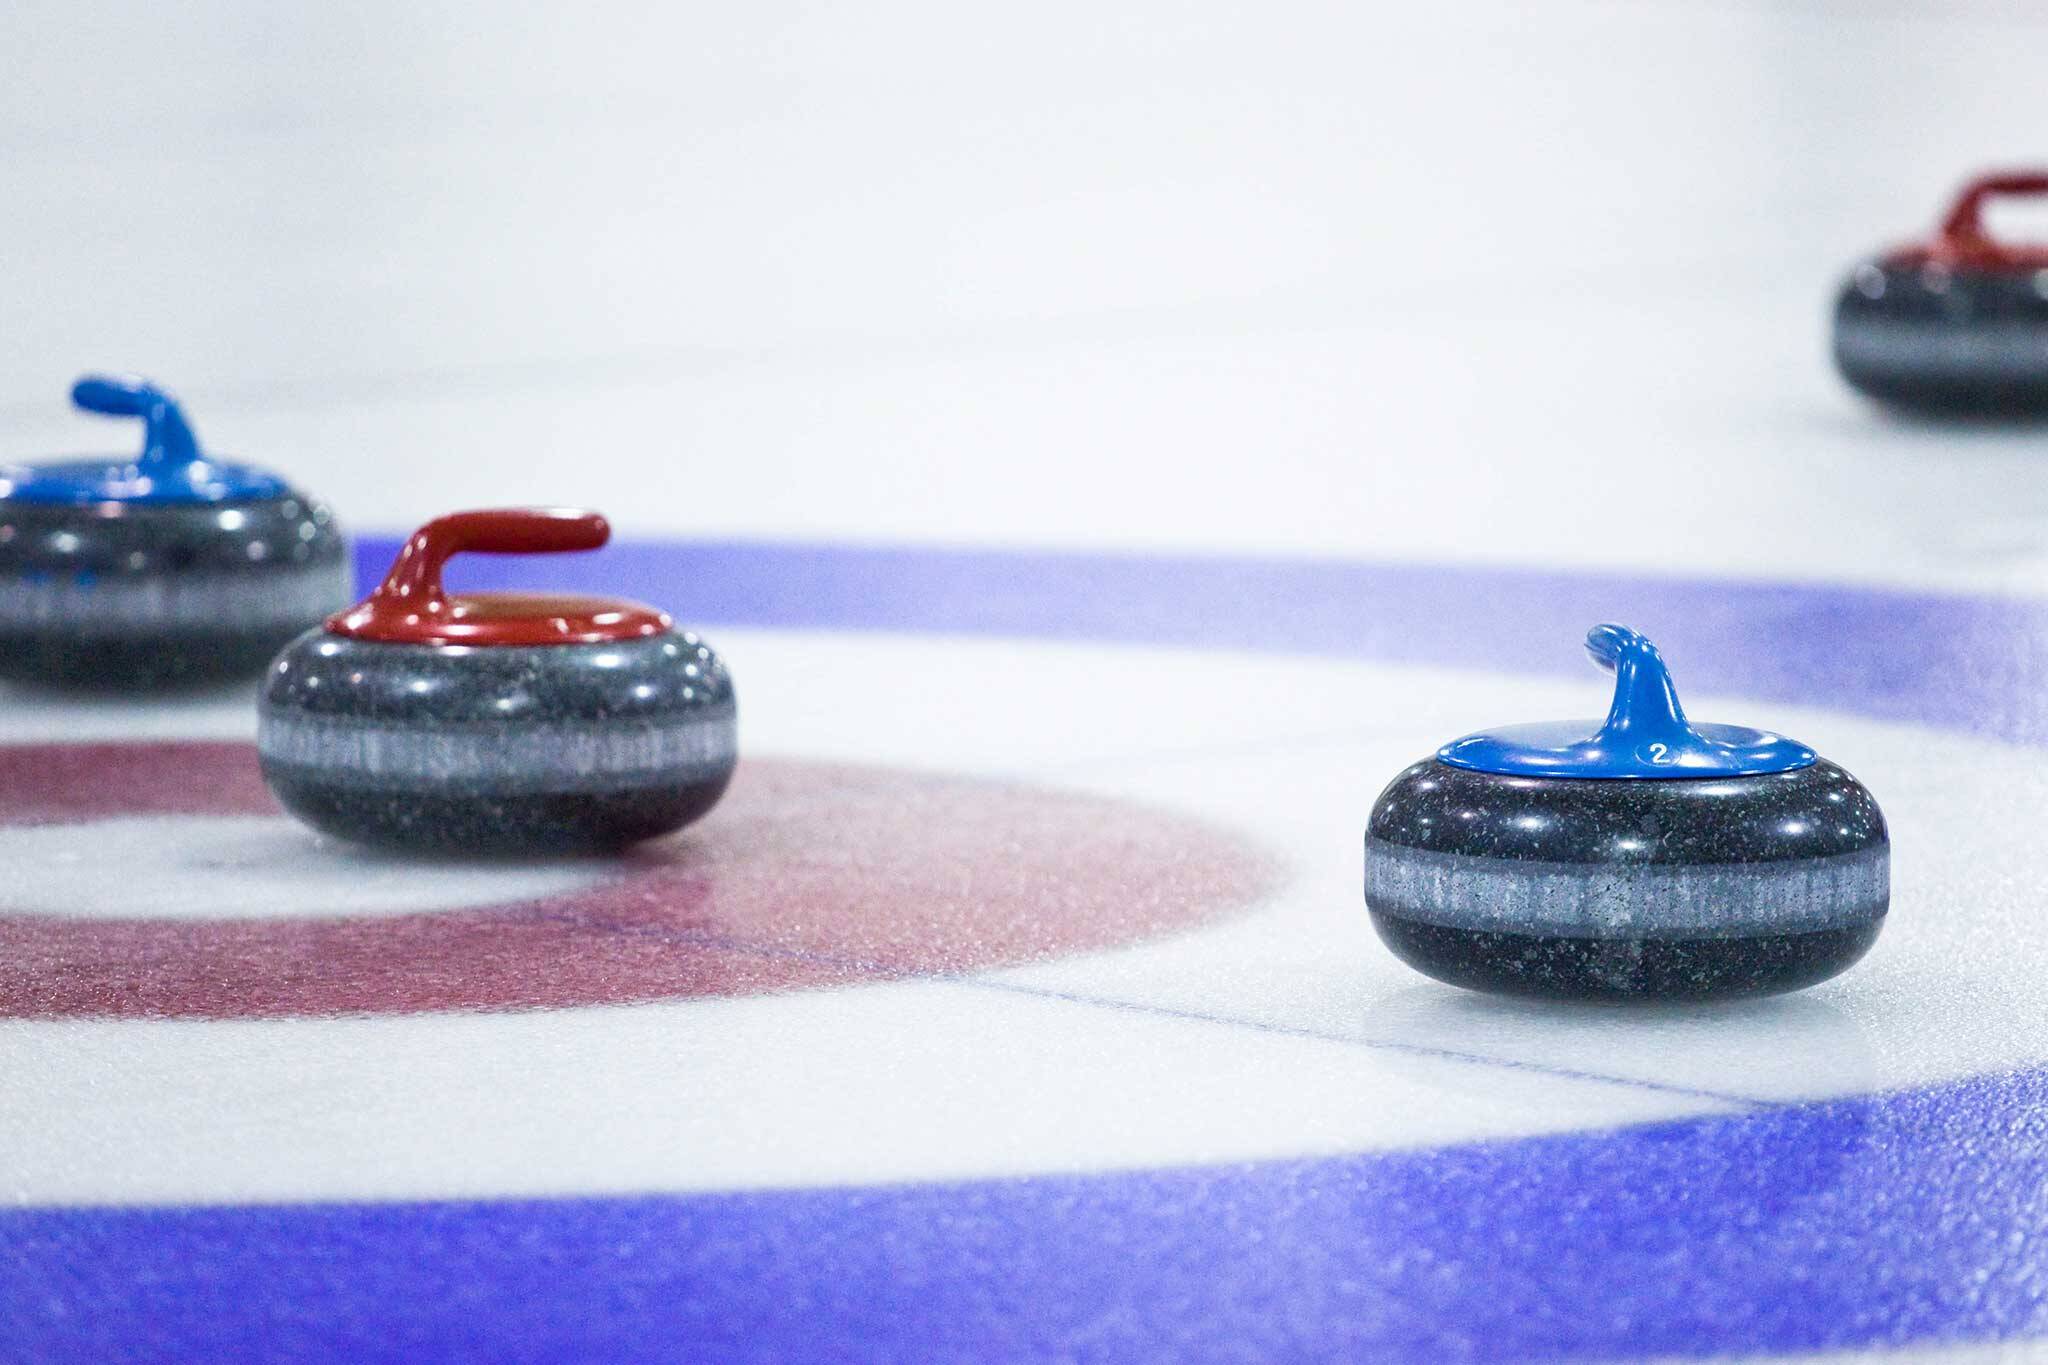 20171129 Curling Toronto ?w=2048&cmd=resize Then Crop&height=1365&quality=70